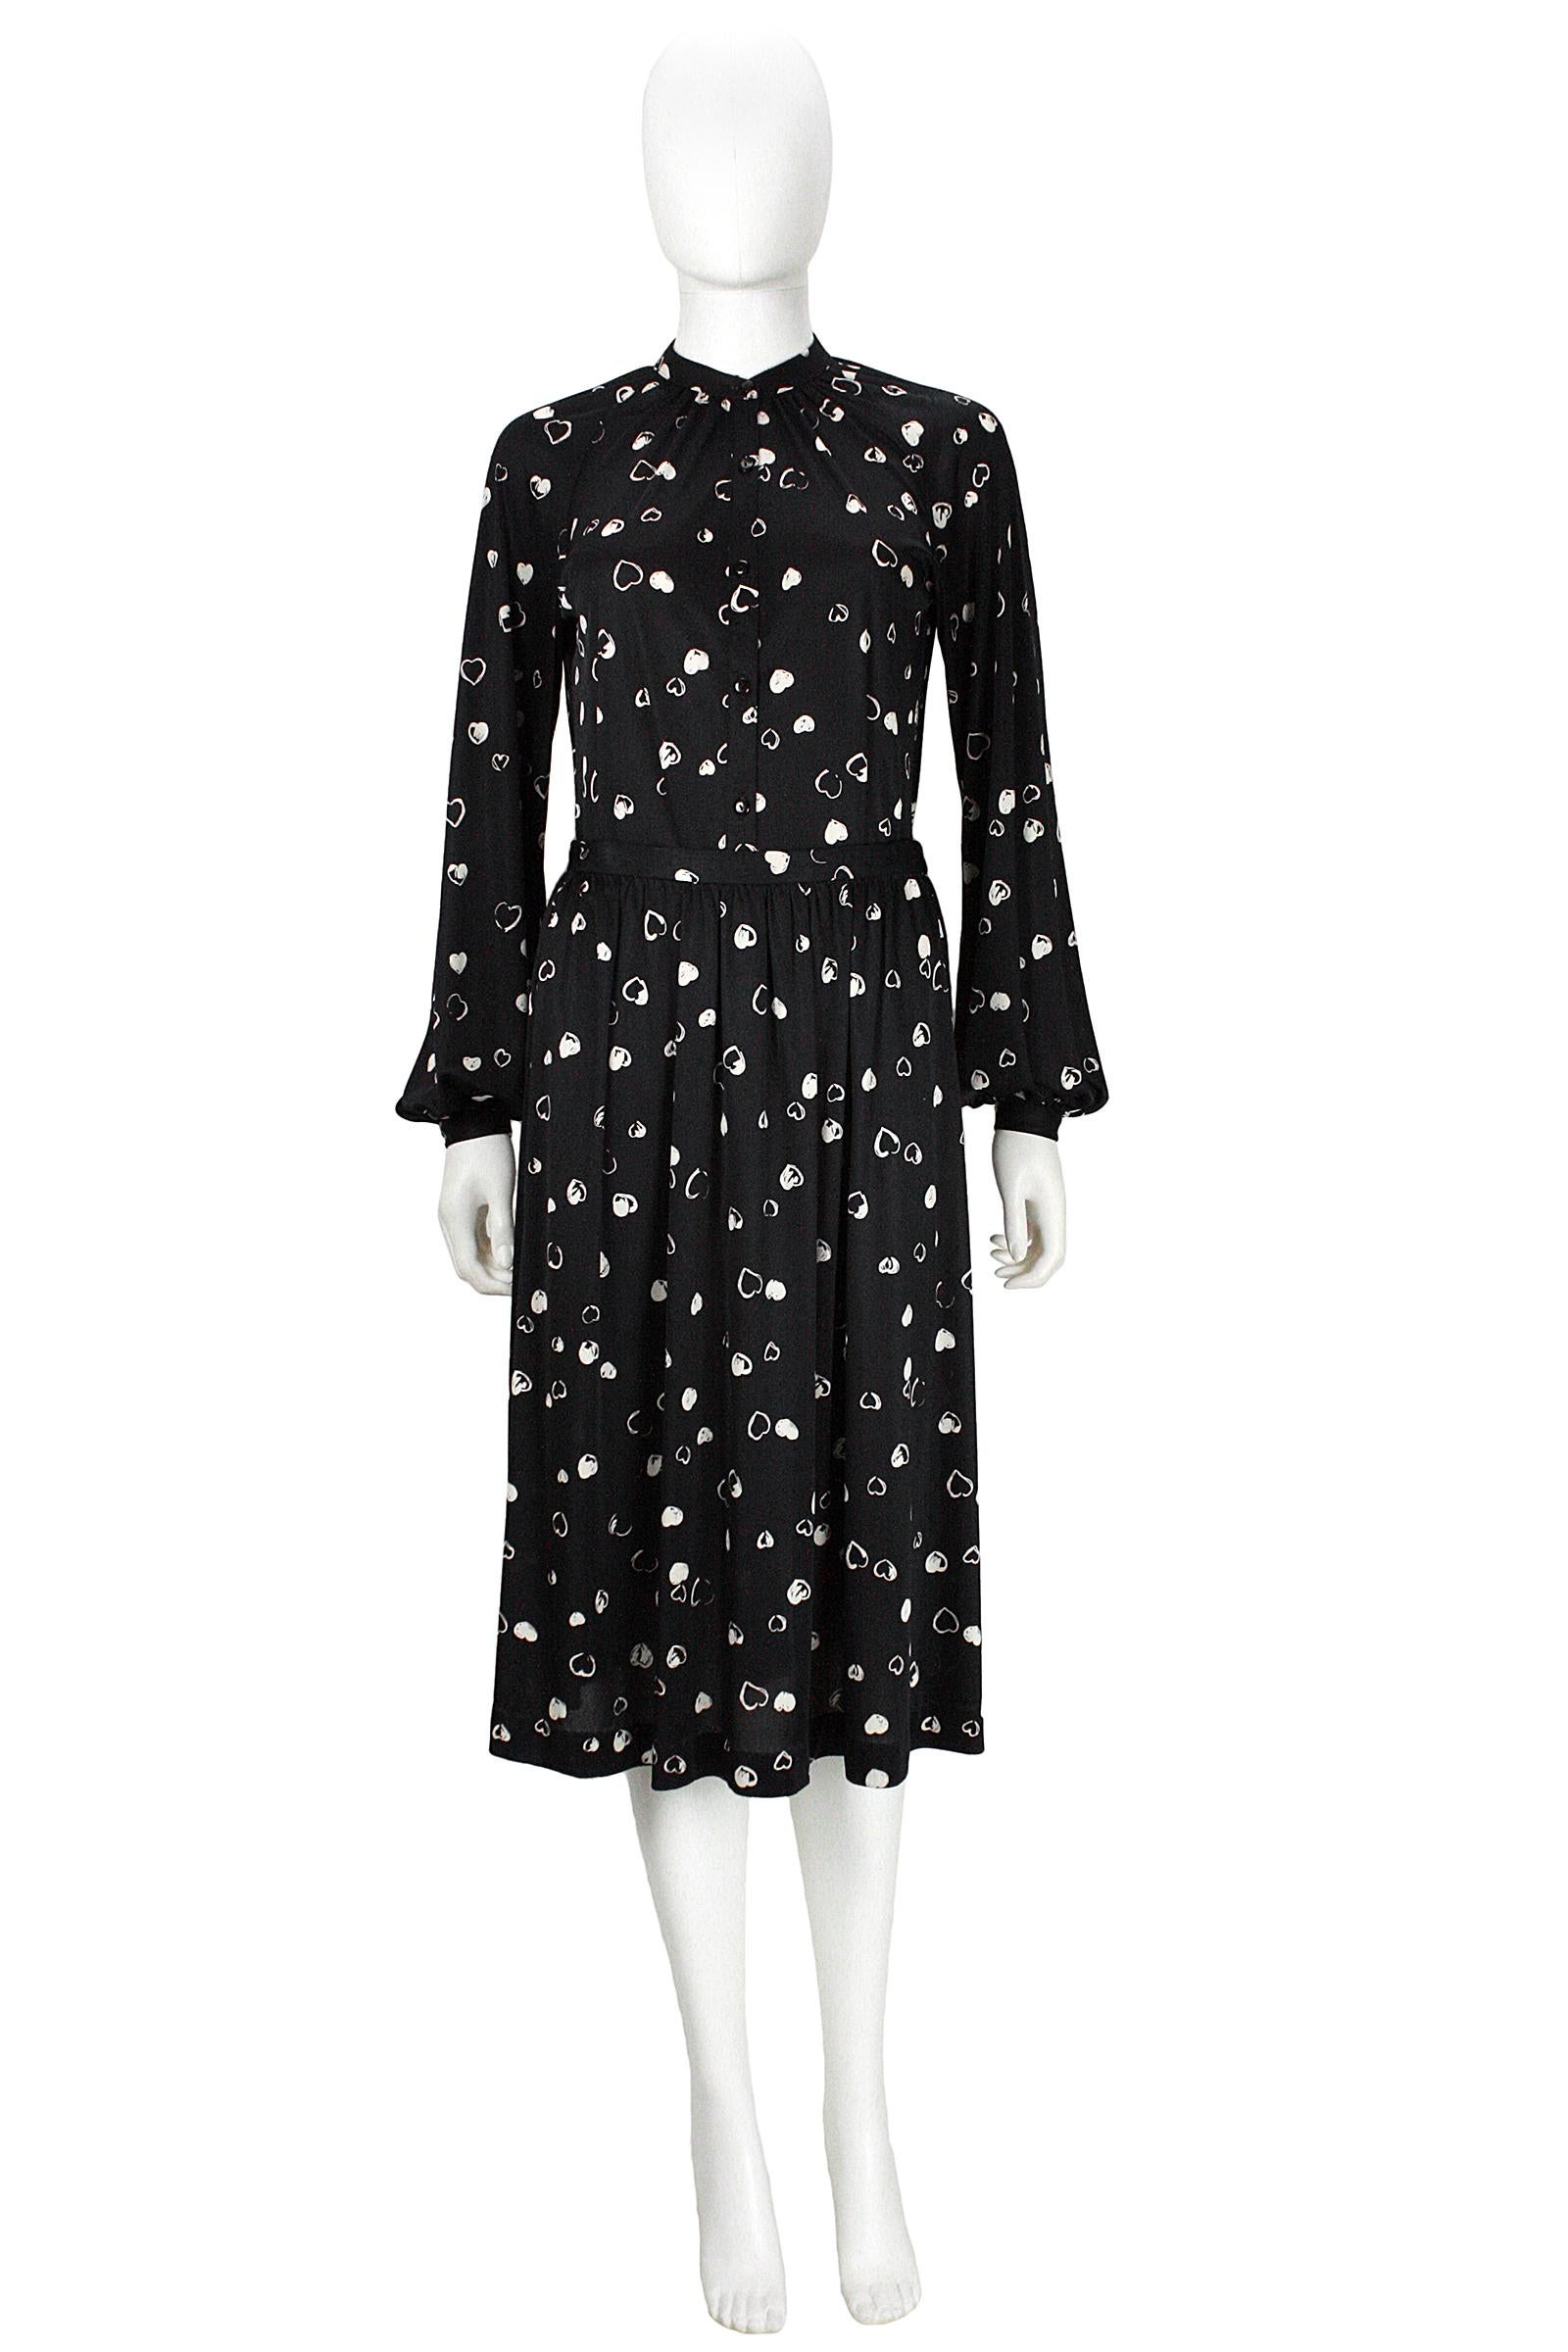 Halston button-down shirt and skirt
Black polyester with white hearts print 
Buttons closure on top
Hook and eye closure on skirt 
Tailored in Hong Kong 
Skirt waist is 27 inches
Skirt length is 28 inches 